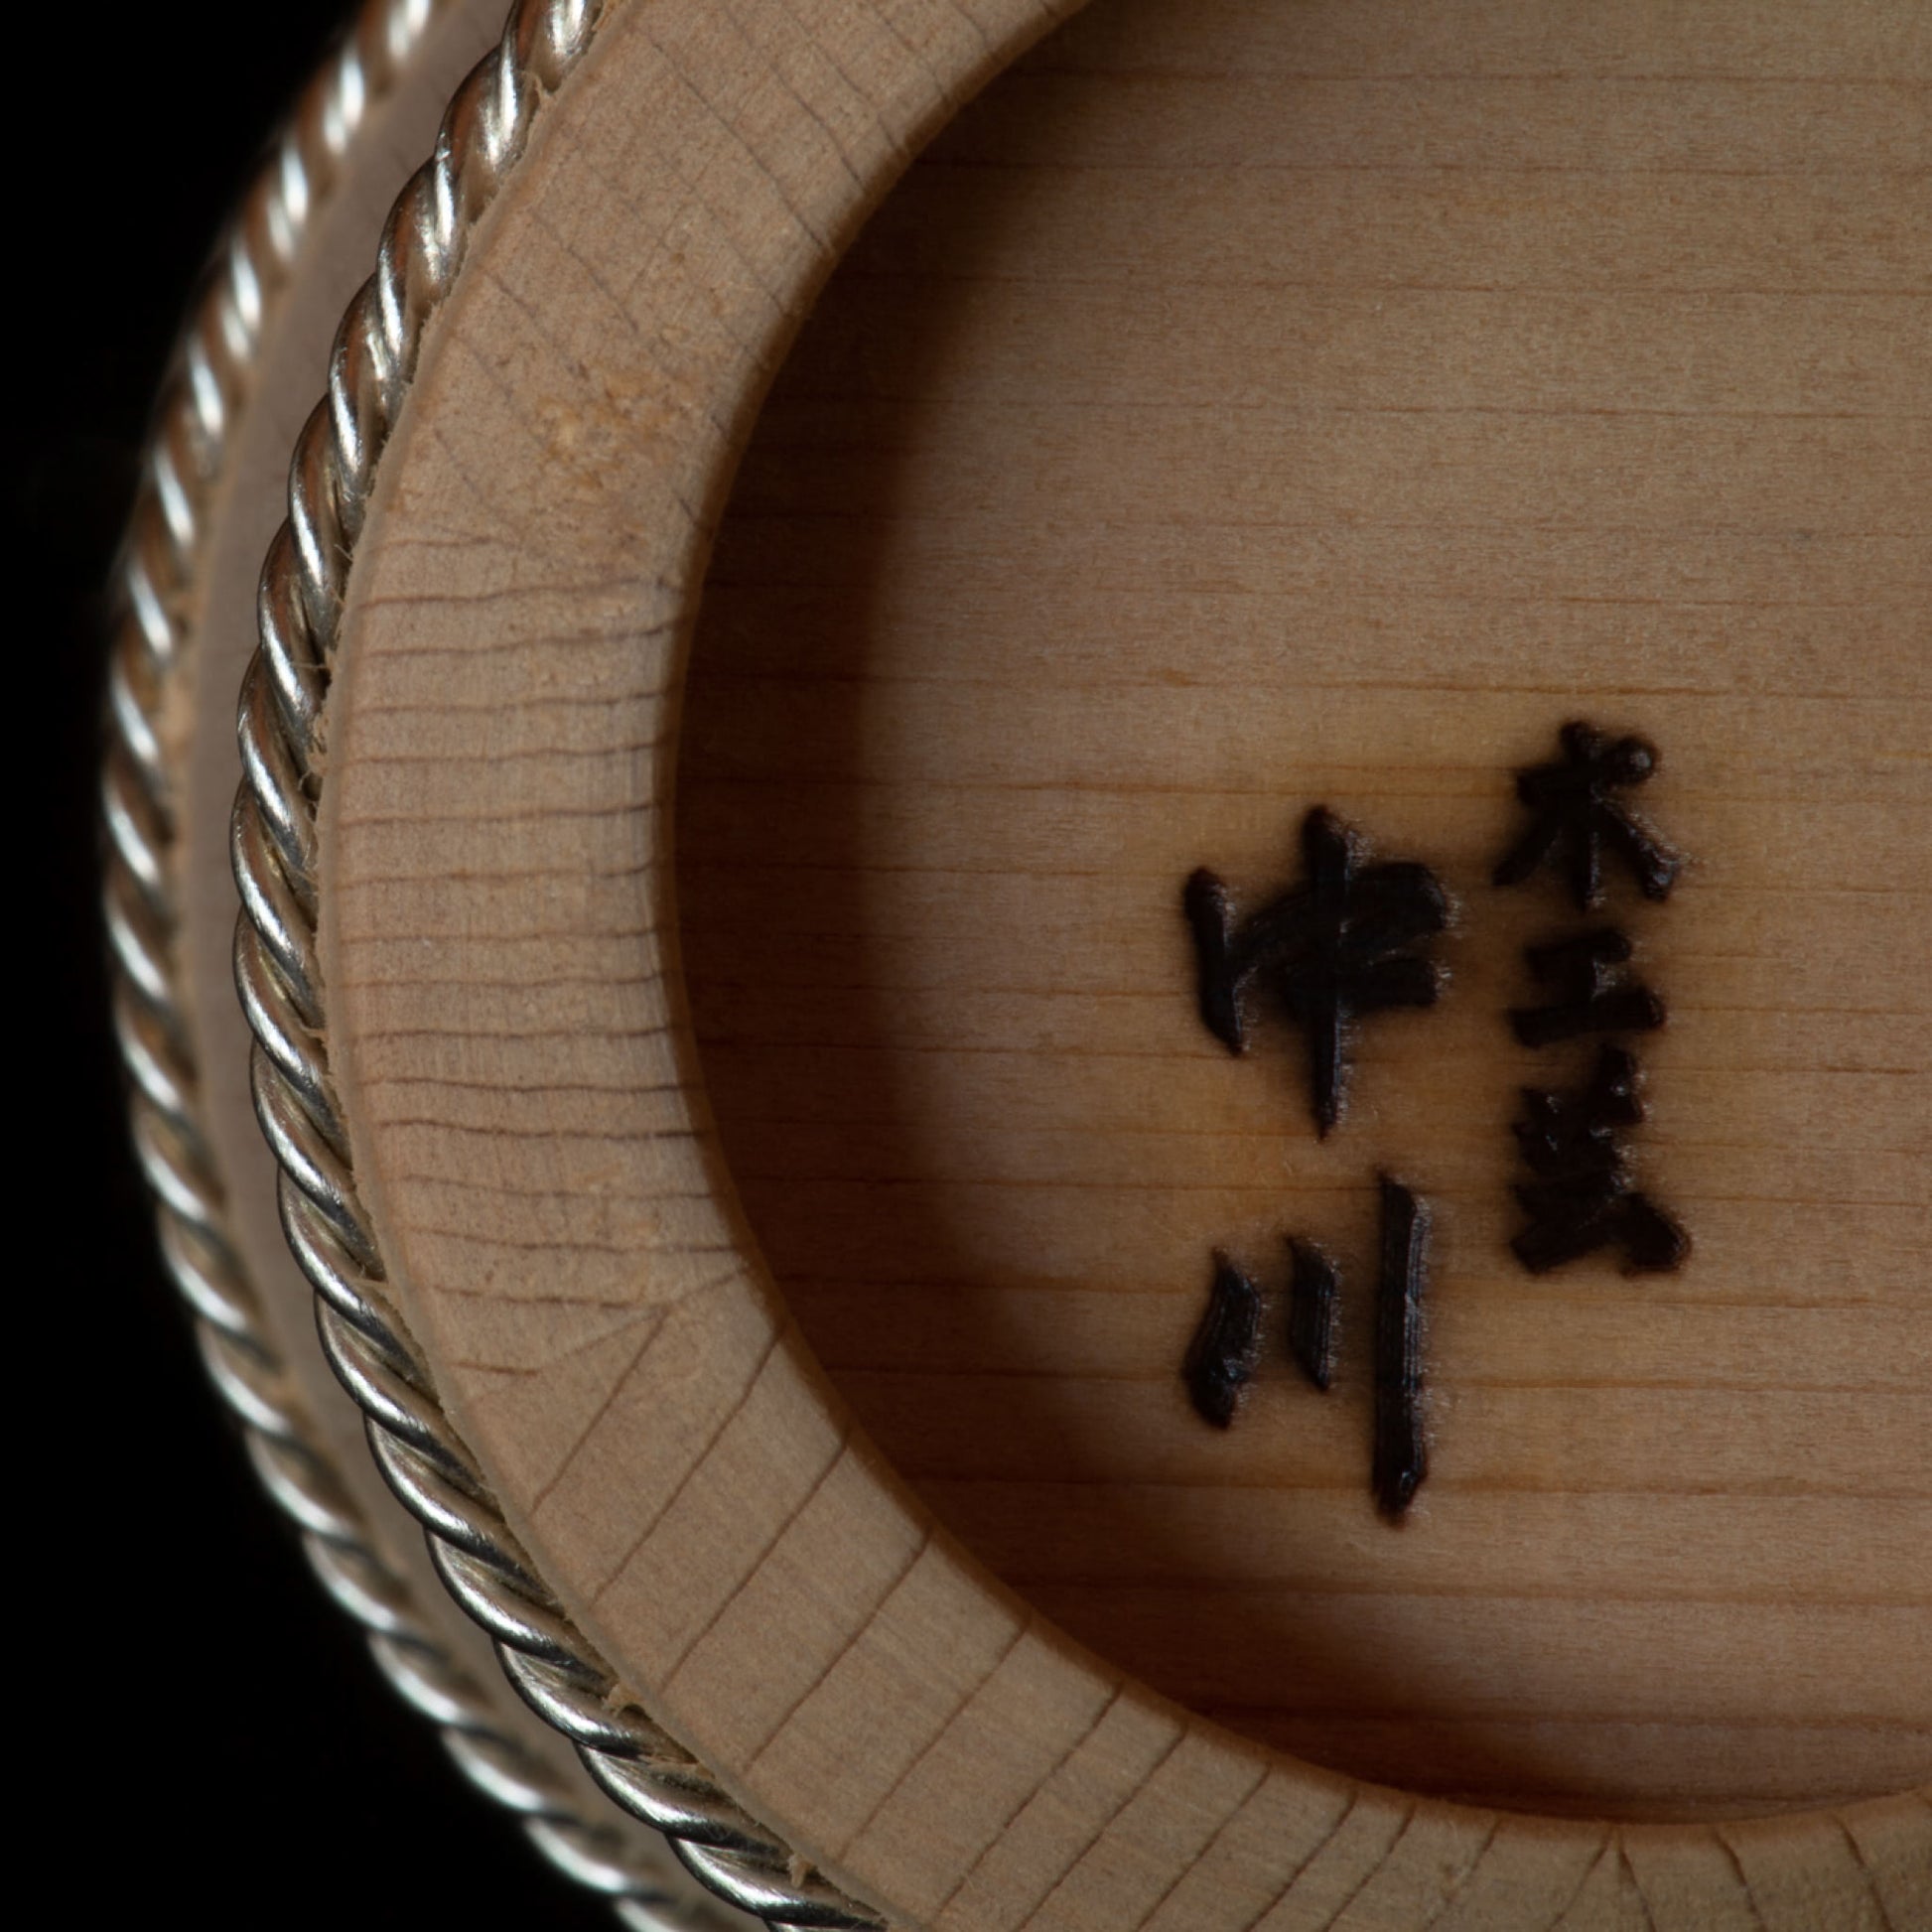 Detail of bottom of wooden Hinoki sake cup with branded lettering